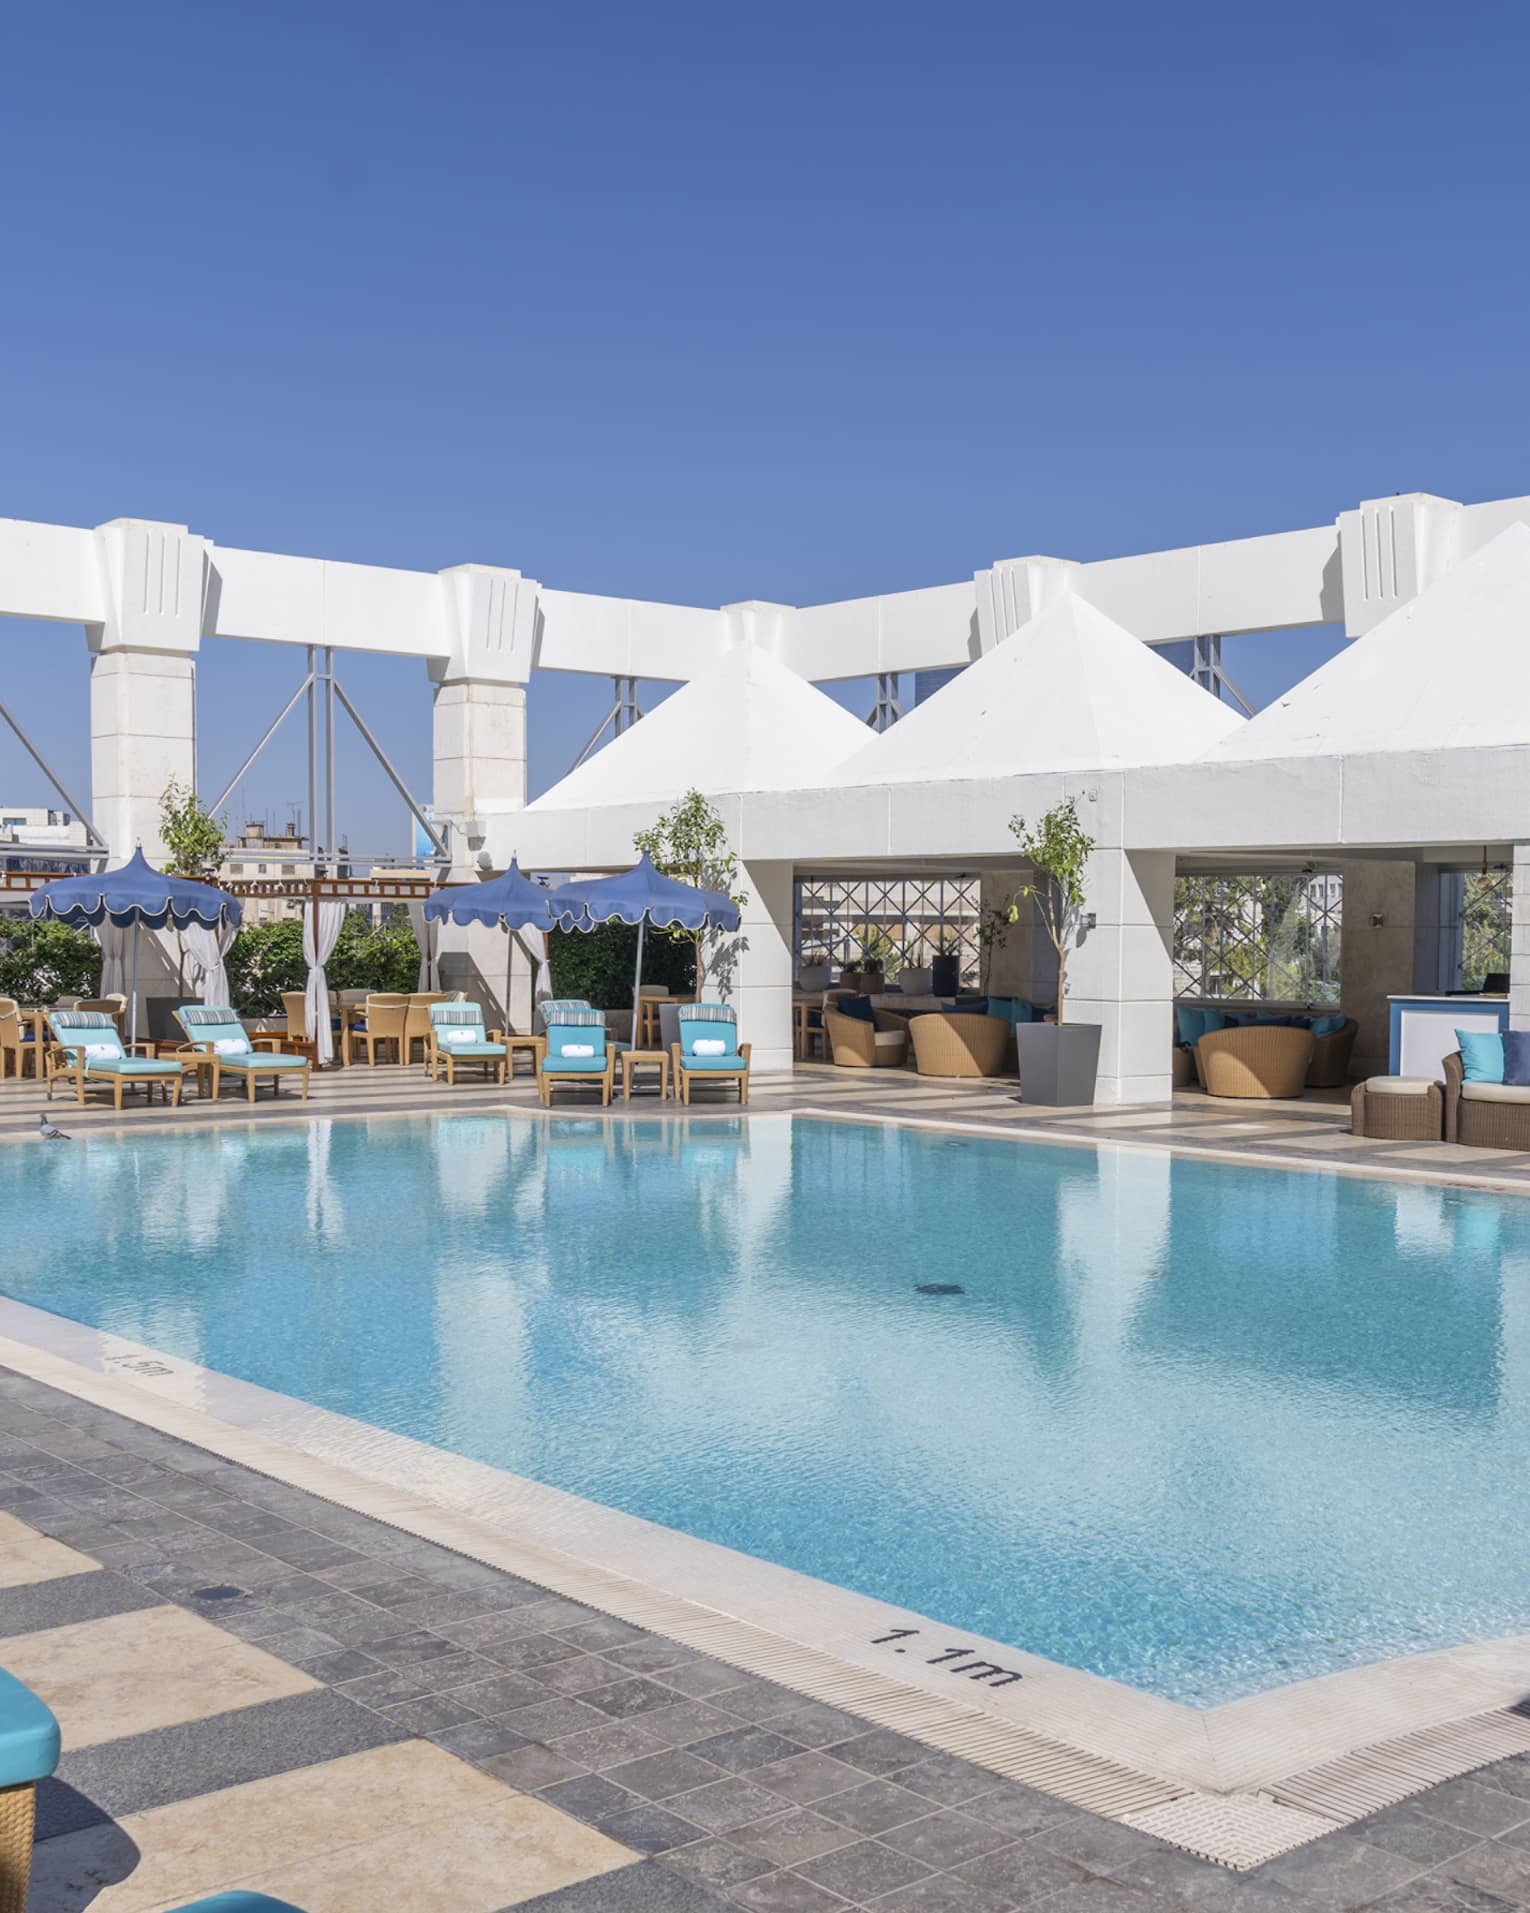 Outdoor pool surrounded by blue lounge chairs and four white tents